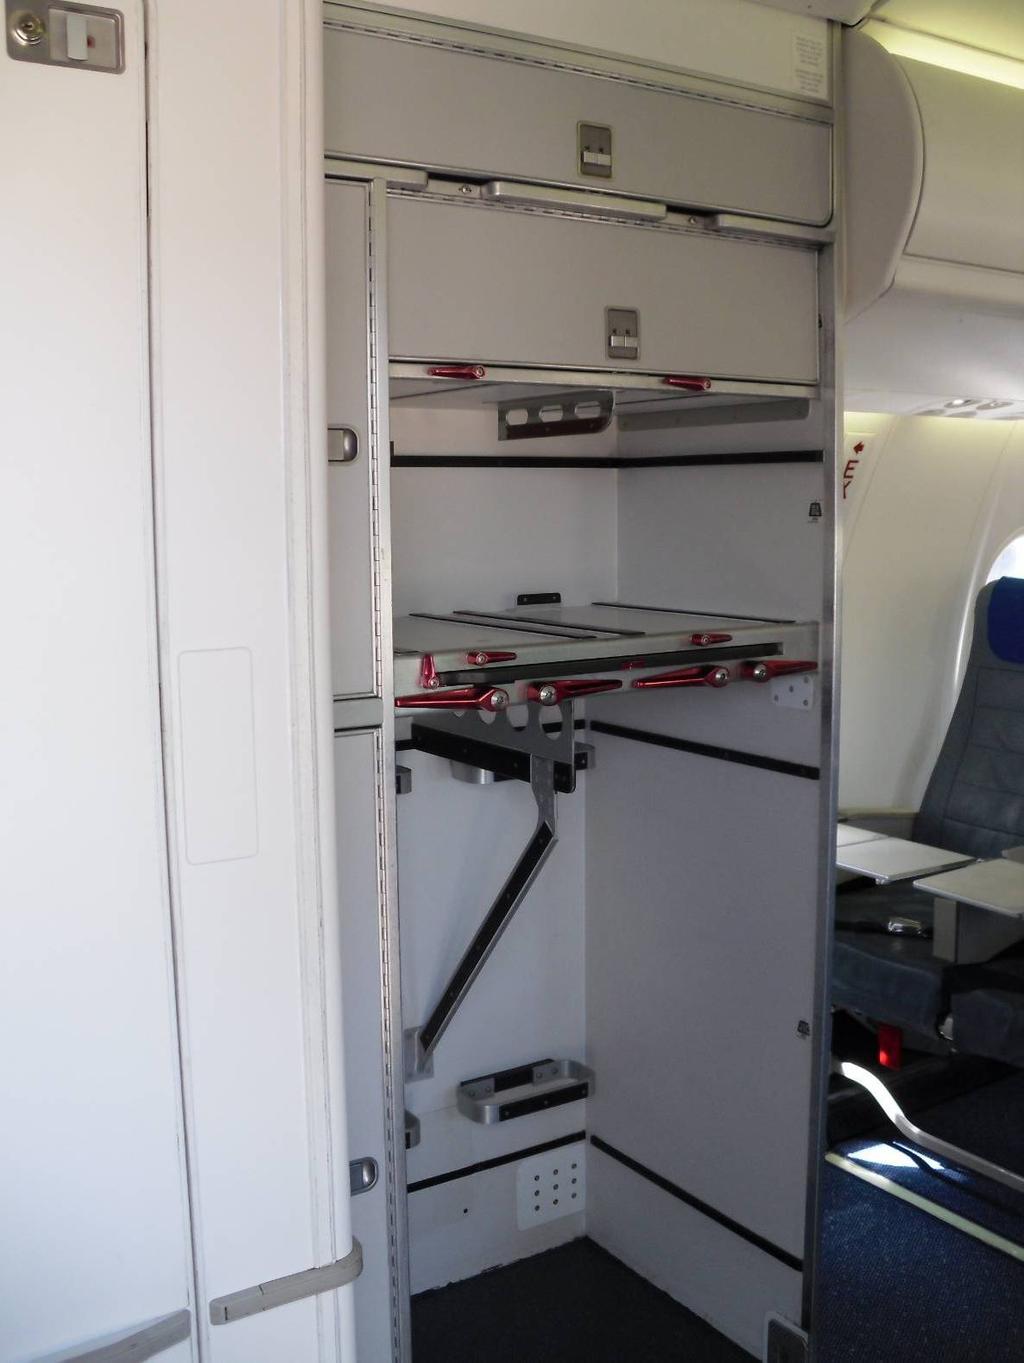 Q400 Serial Number 4048 Available for Sale G6 Galley Note: Ovens, Coffee Makers, Galley Carts and Boxes will not be provided with the aircraft.